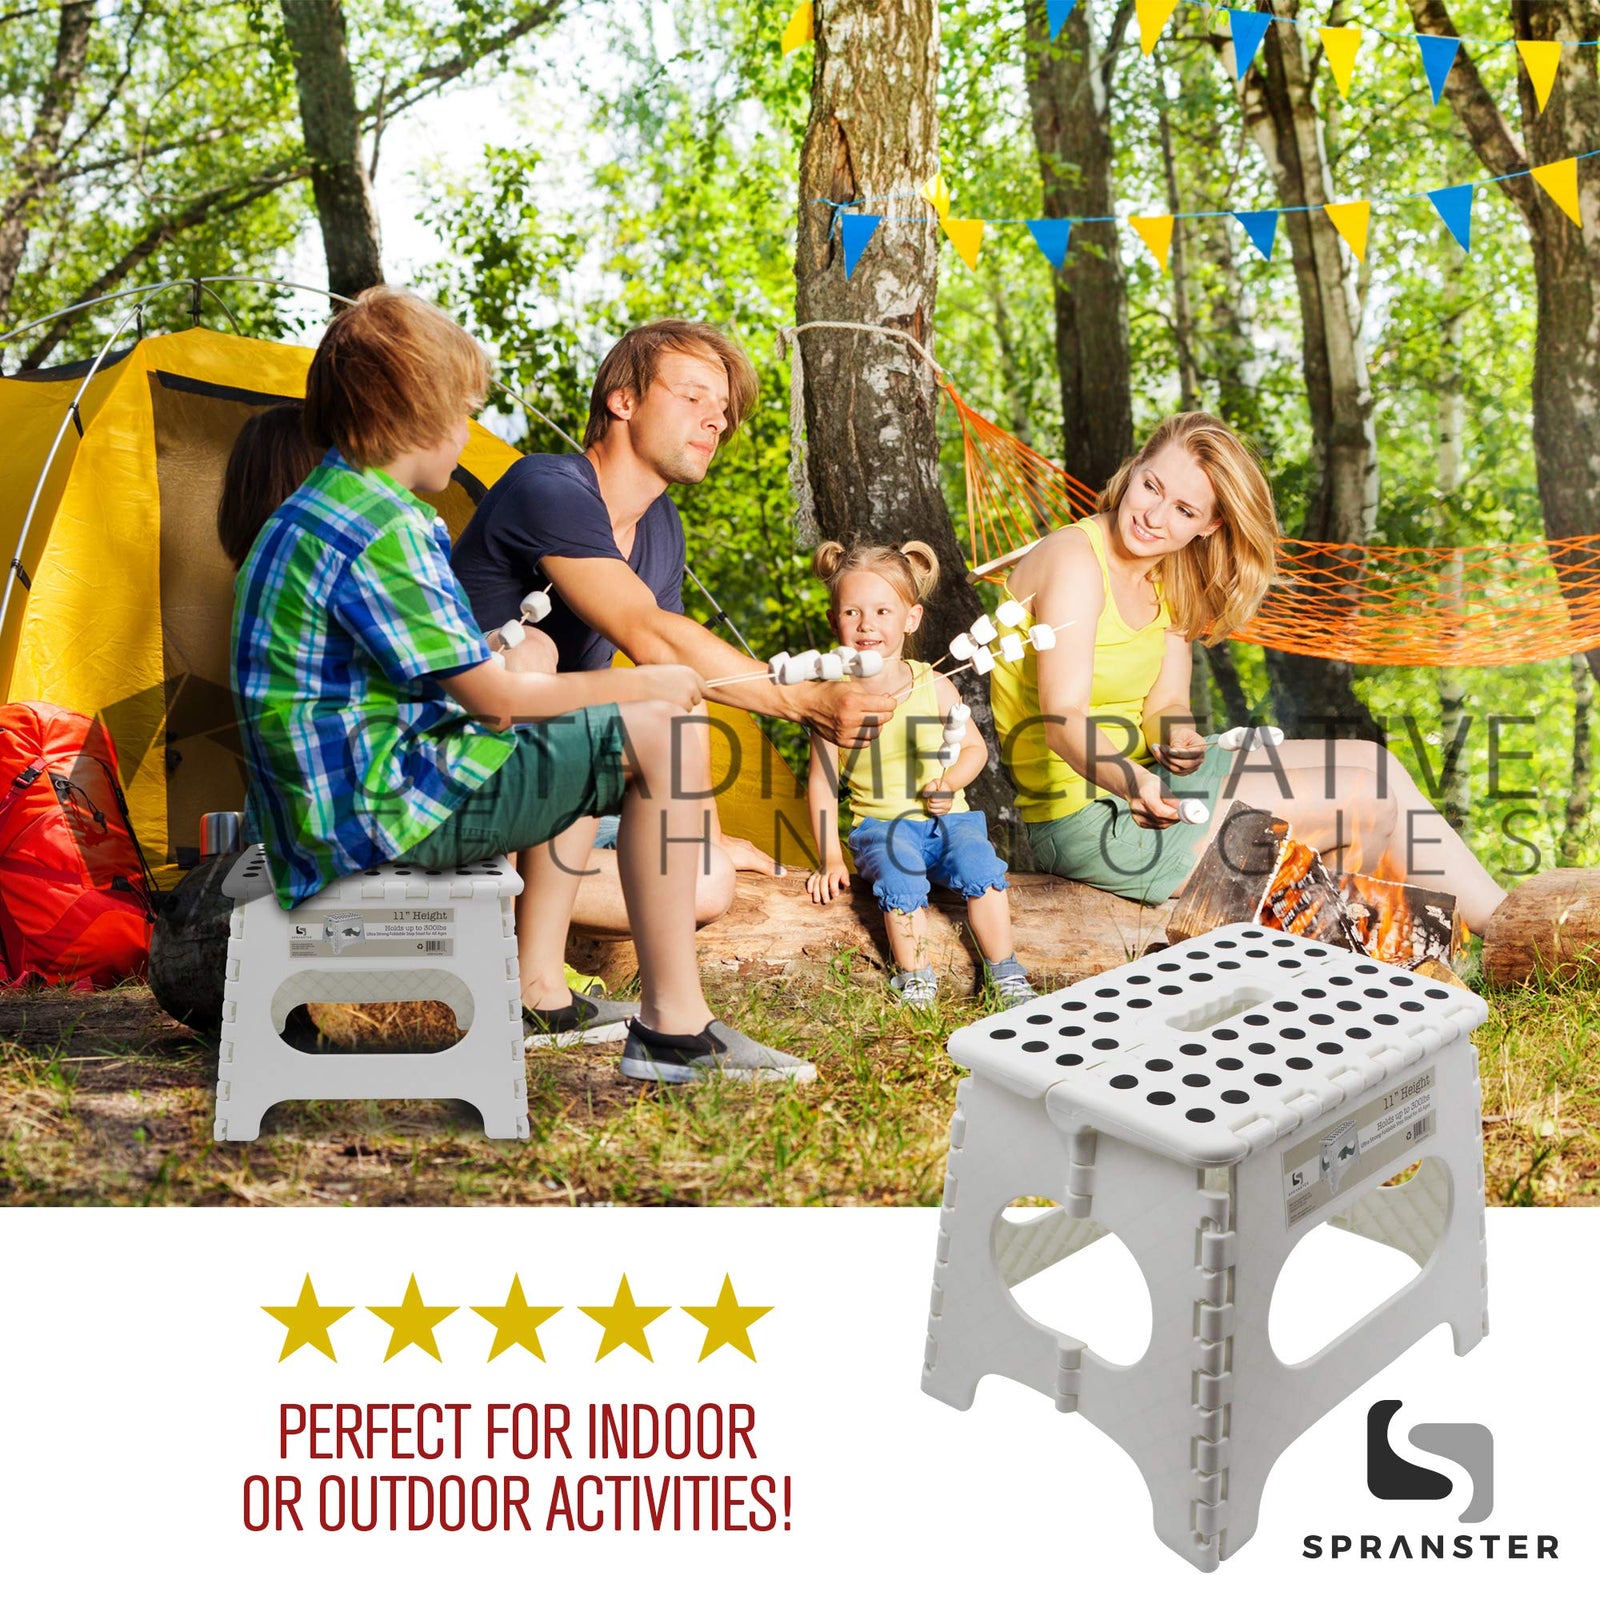 Super Strong Folding Step Stool - 11" Height - Holds up to 300 Lb - The Lightweight Foldable Step Stool is Sturdy Enough to Support Adults and Safe Enough for Kids